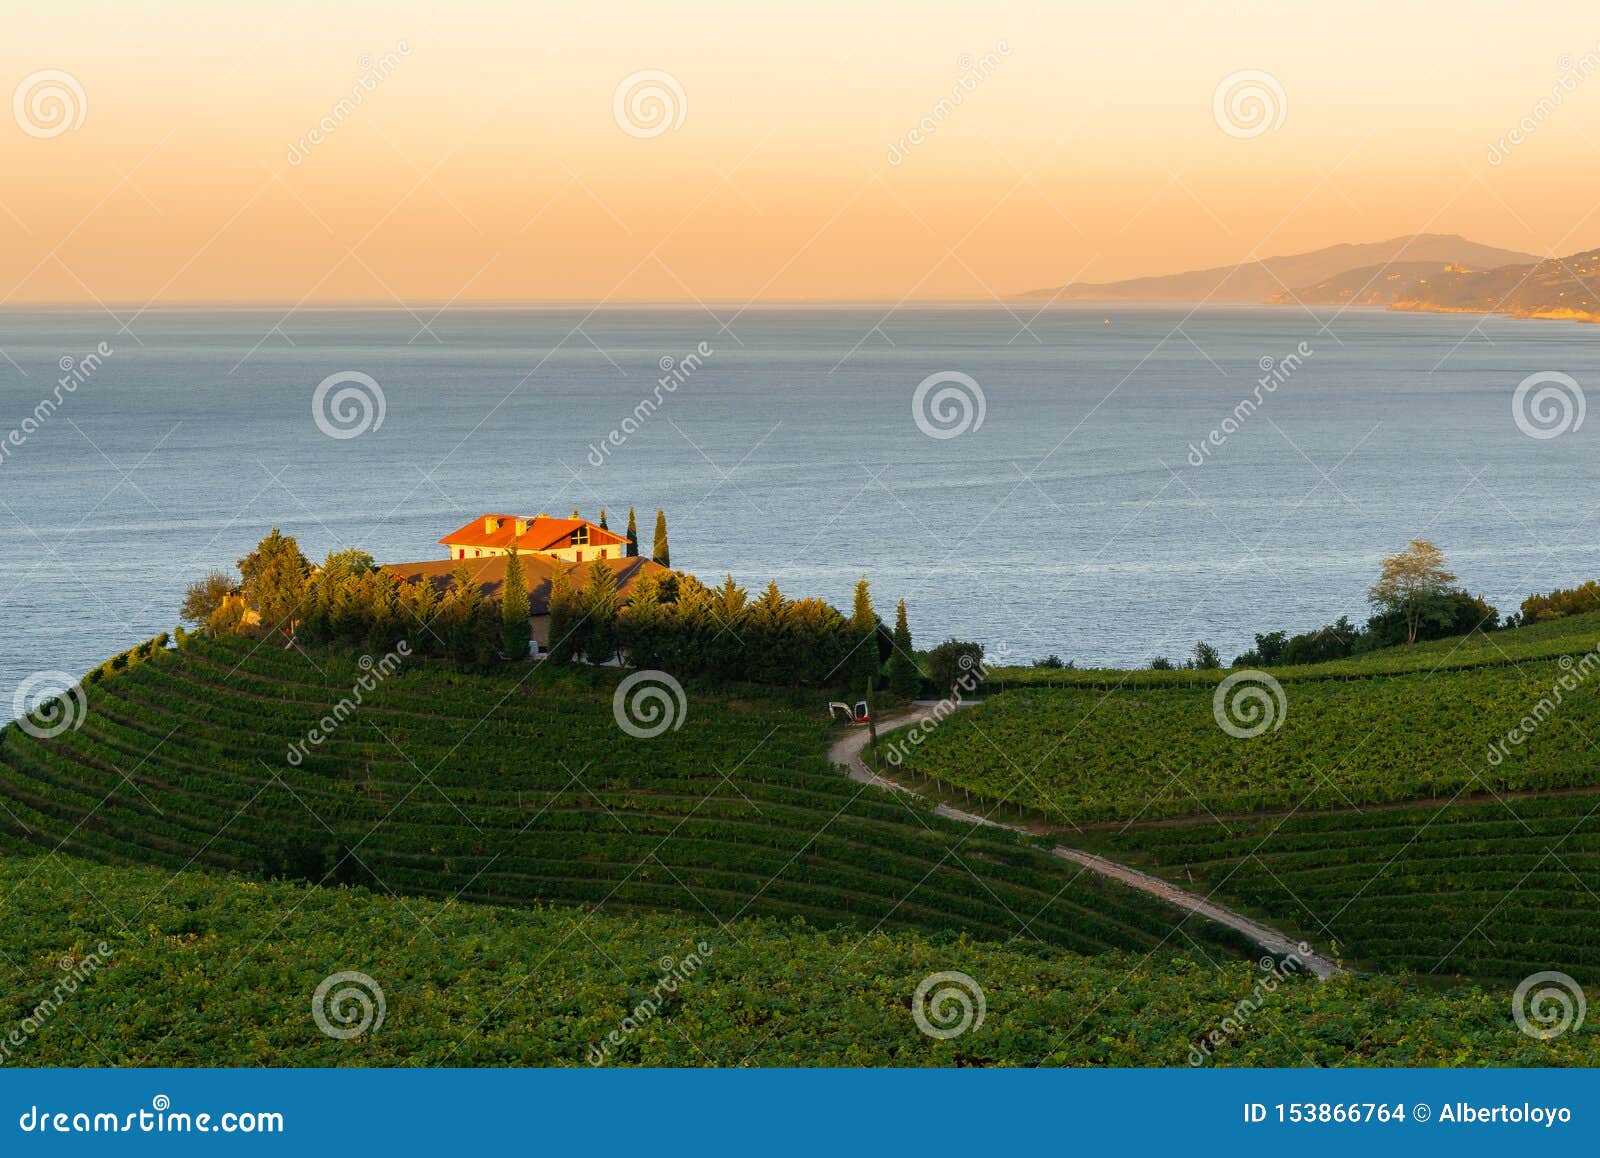 txakoli white wine vineyards with the cantabrian sea in the background, getaria, spain